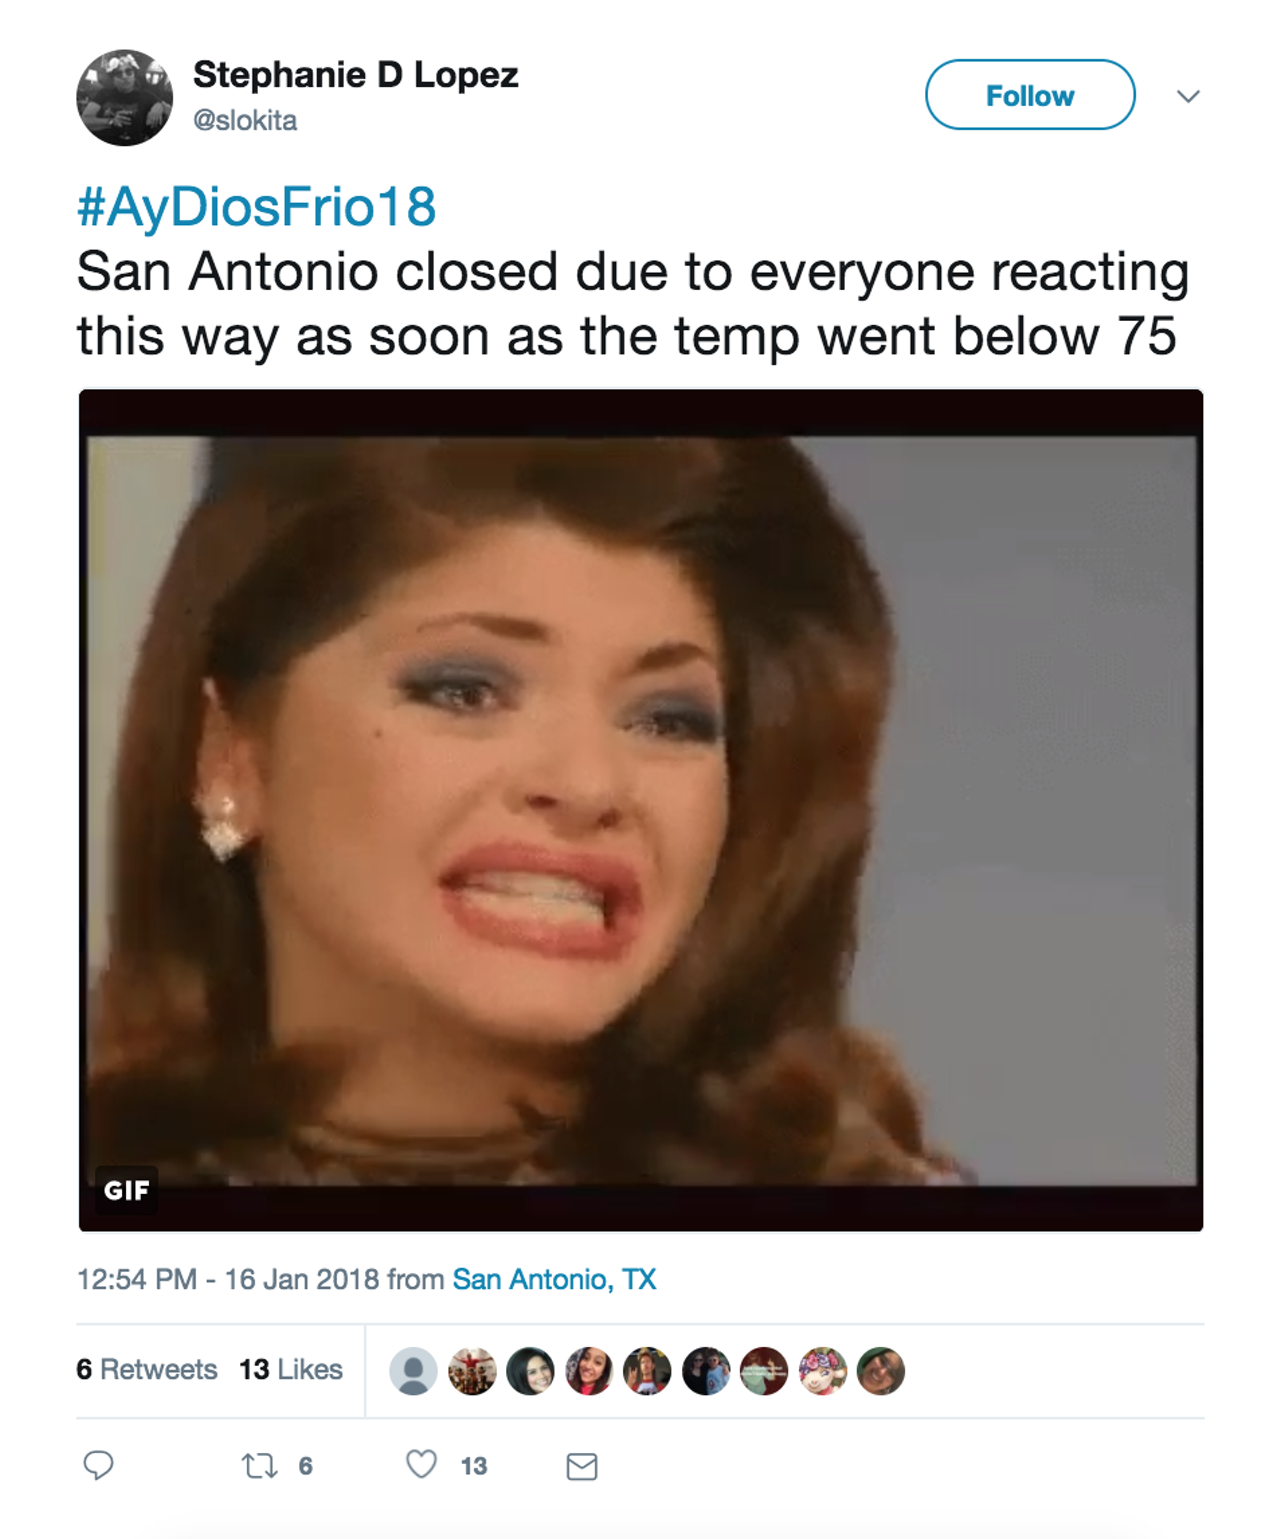 These #AyDiosFrio18 Tweets Show How San Antonio Reacts to Cold Weather